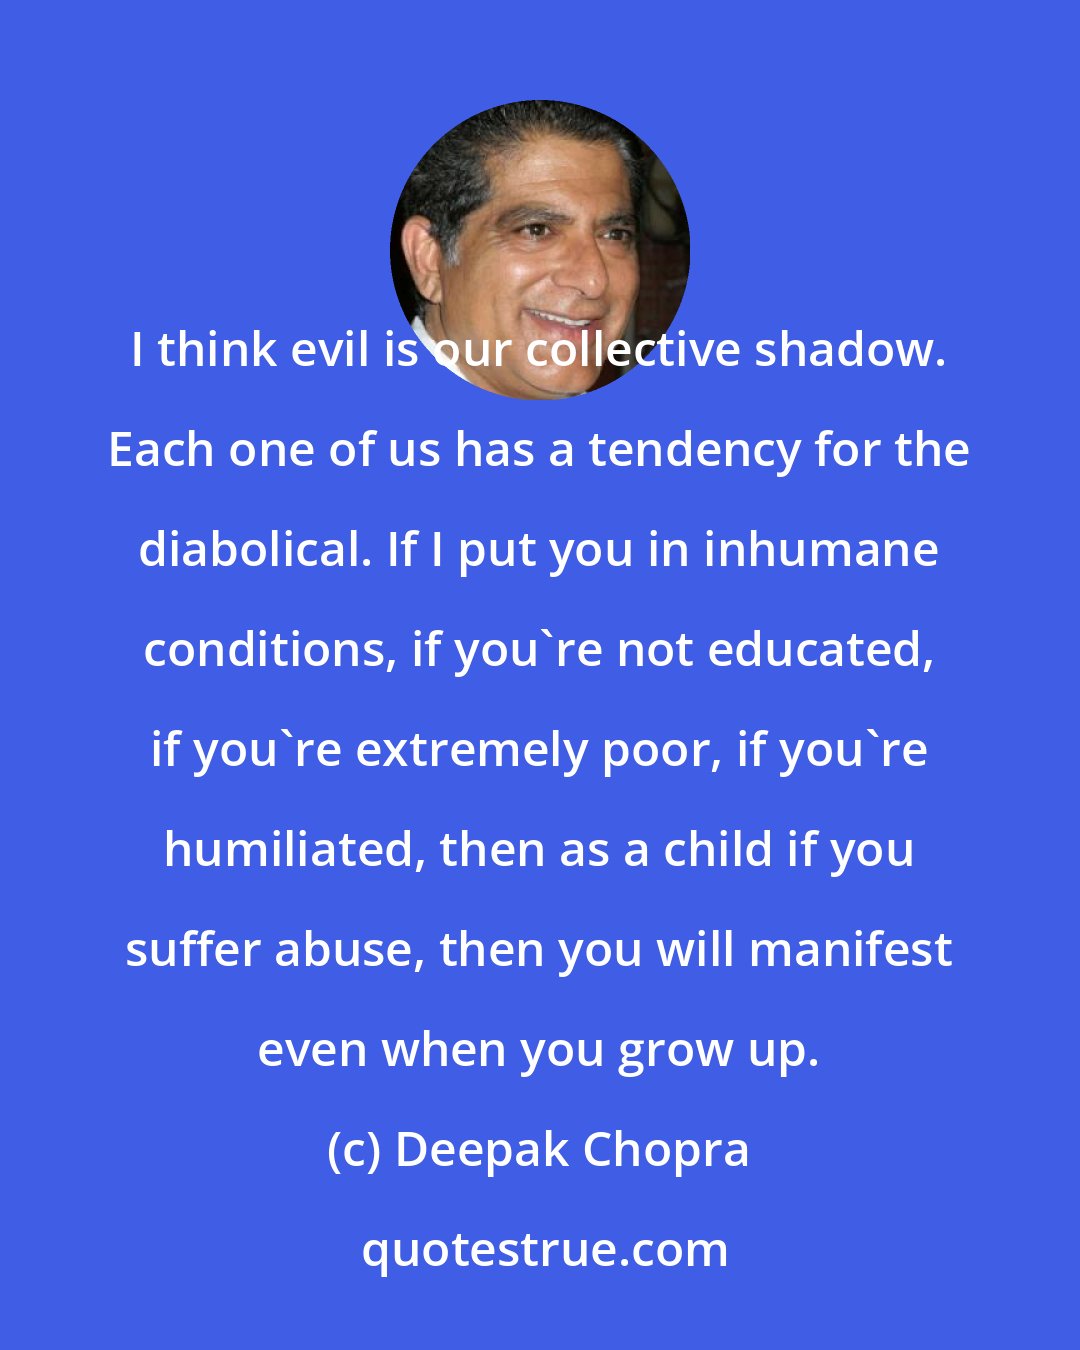 Deepak Chopra: I think evil is our collective shadow. Each one of us has a tendency for the diabolical. If I put you in inhumane conditions, if you're not educated, if you're extremely poor, if you're humiliated, then as a child if you suffer abuse, then you will manifest even when you grow up.